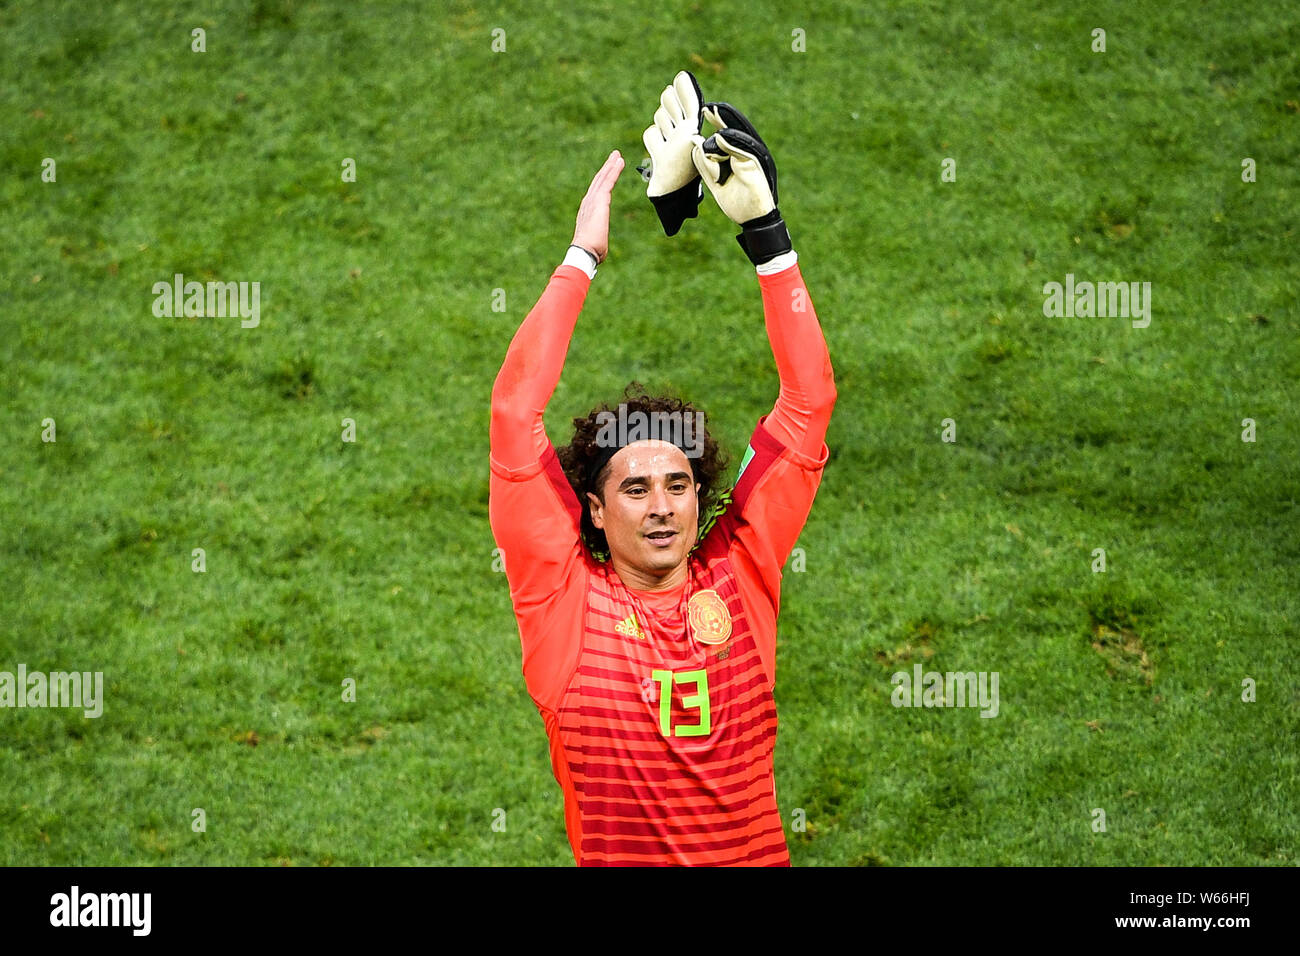 Goalkeeper Guillermo Ochoa of Mexico celebrates after his team defeated Germany in their Group F match during the FIFA World Cup 2018 in Moscow, Russi Stock Photo